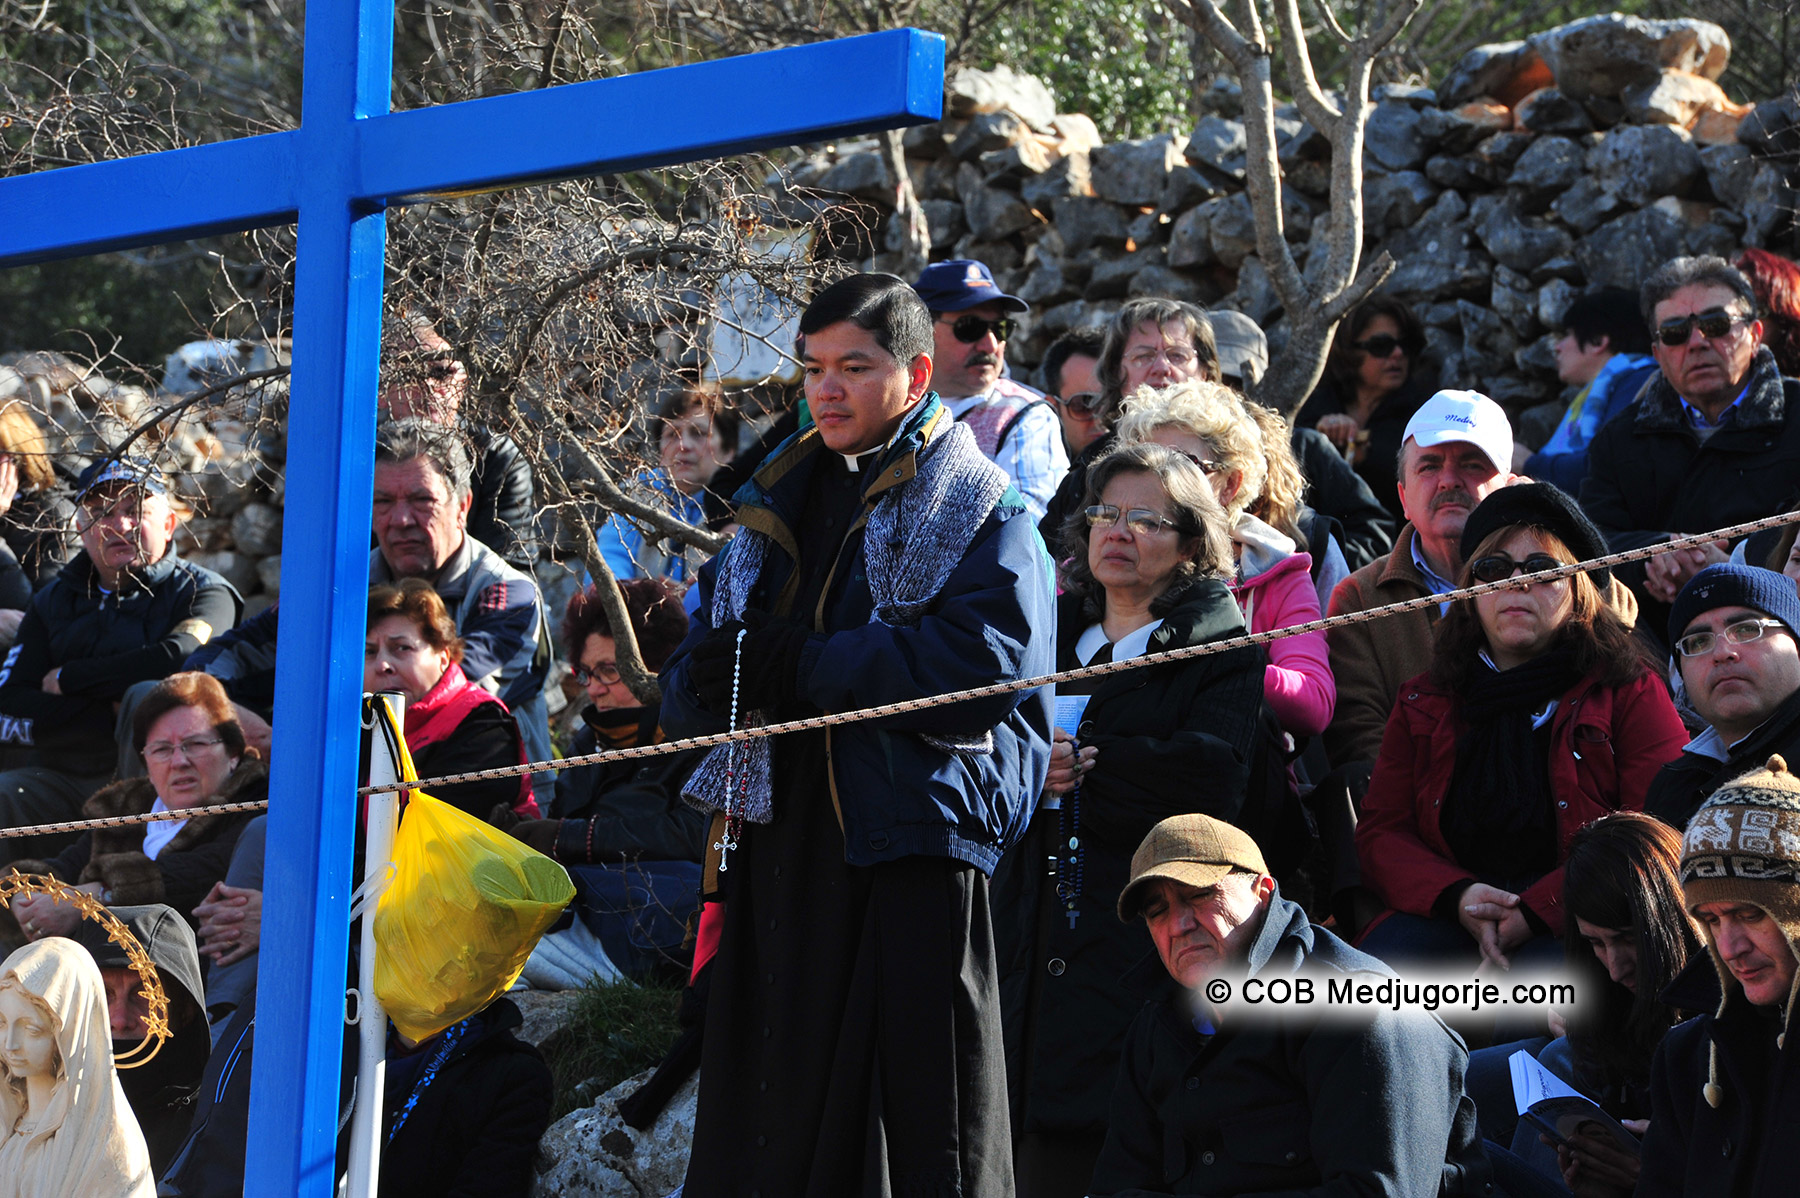 March 18, 2012 Pilgrims praying with Priest